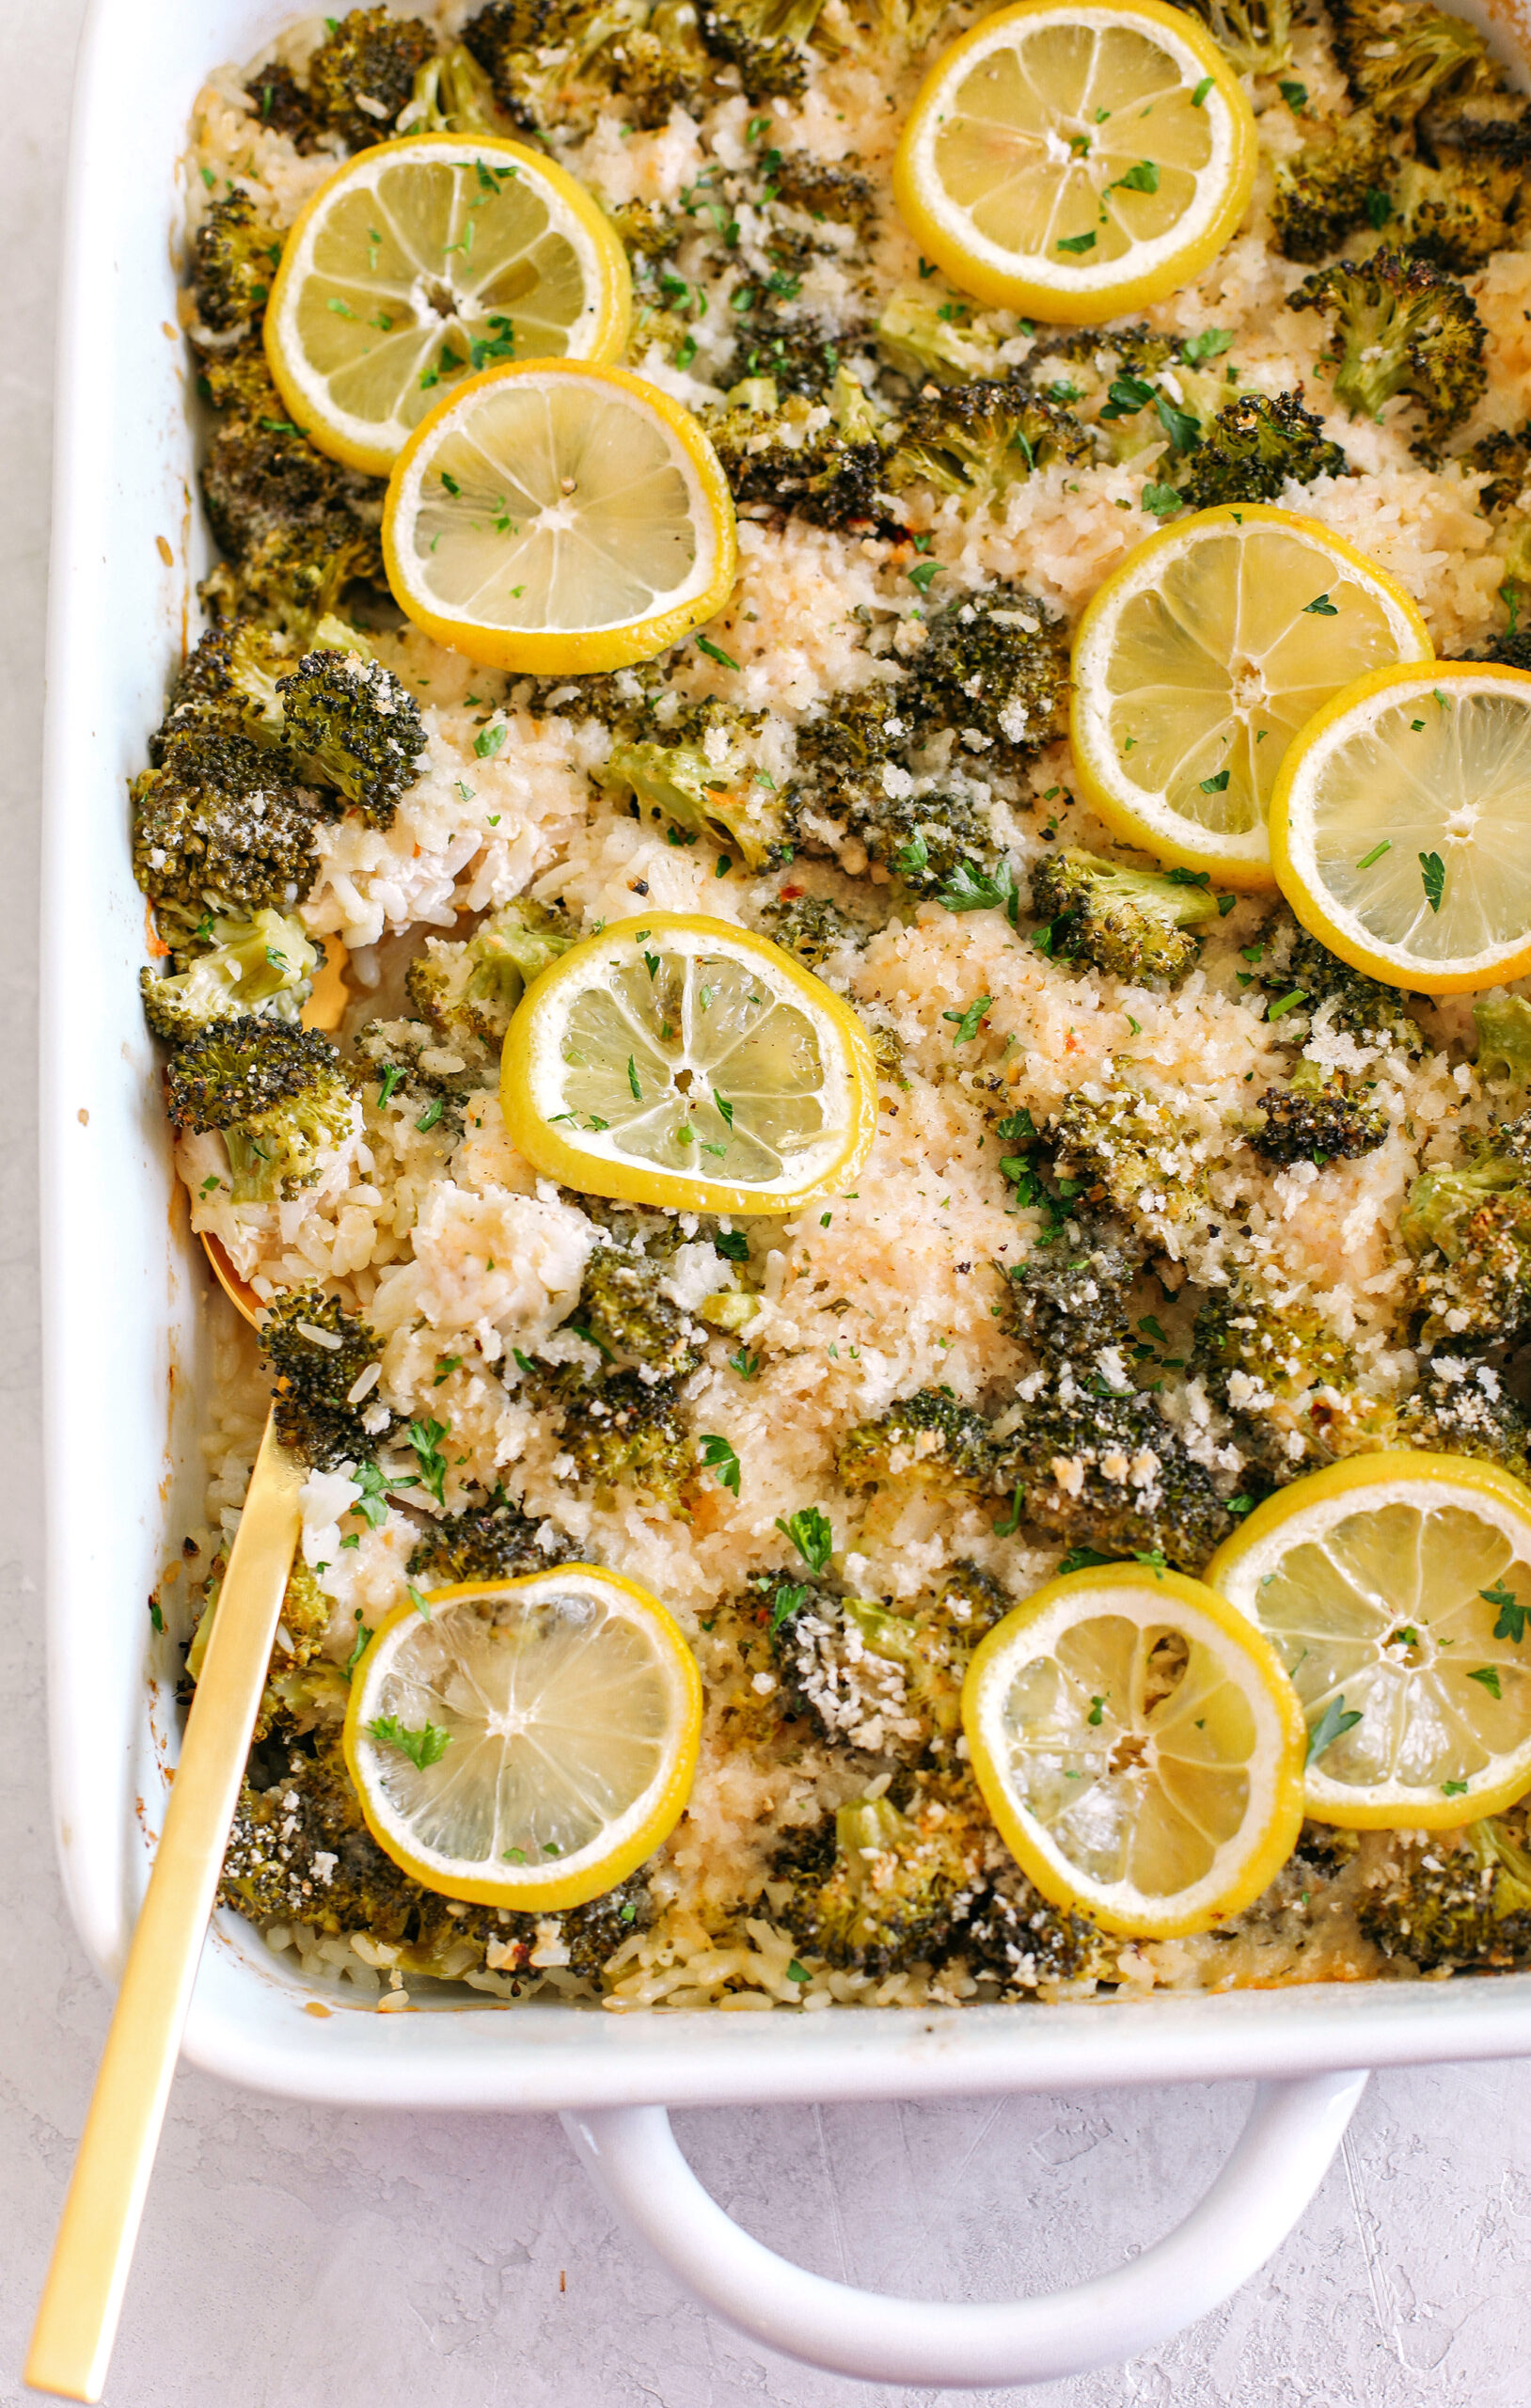 This Creamy Lemon Chicken, Broccoli and Rice Casserole is the perfect weeknight meal that is full of so much flavor and easily made in one dish without pre-cooking anything beforehand!